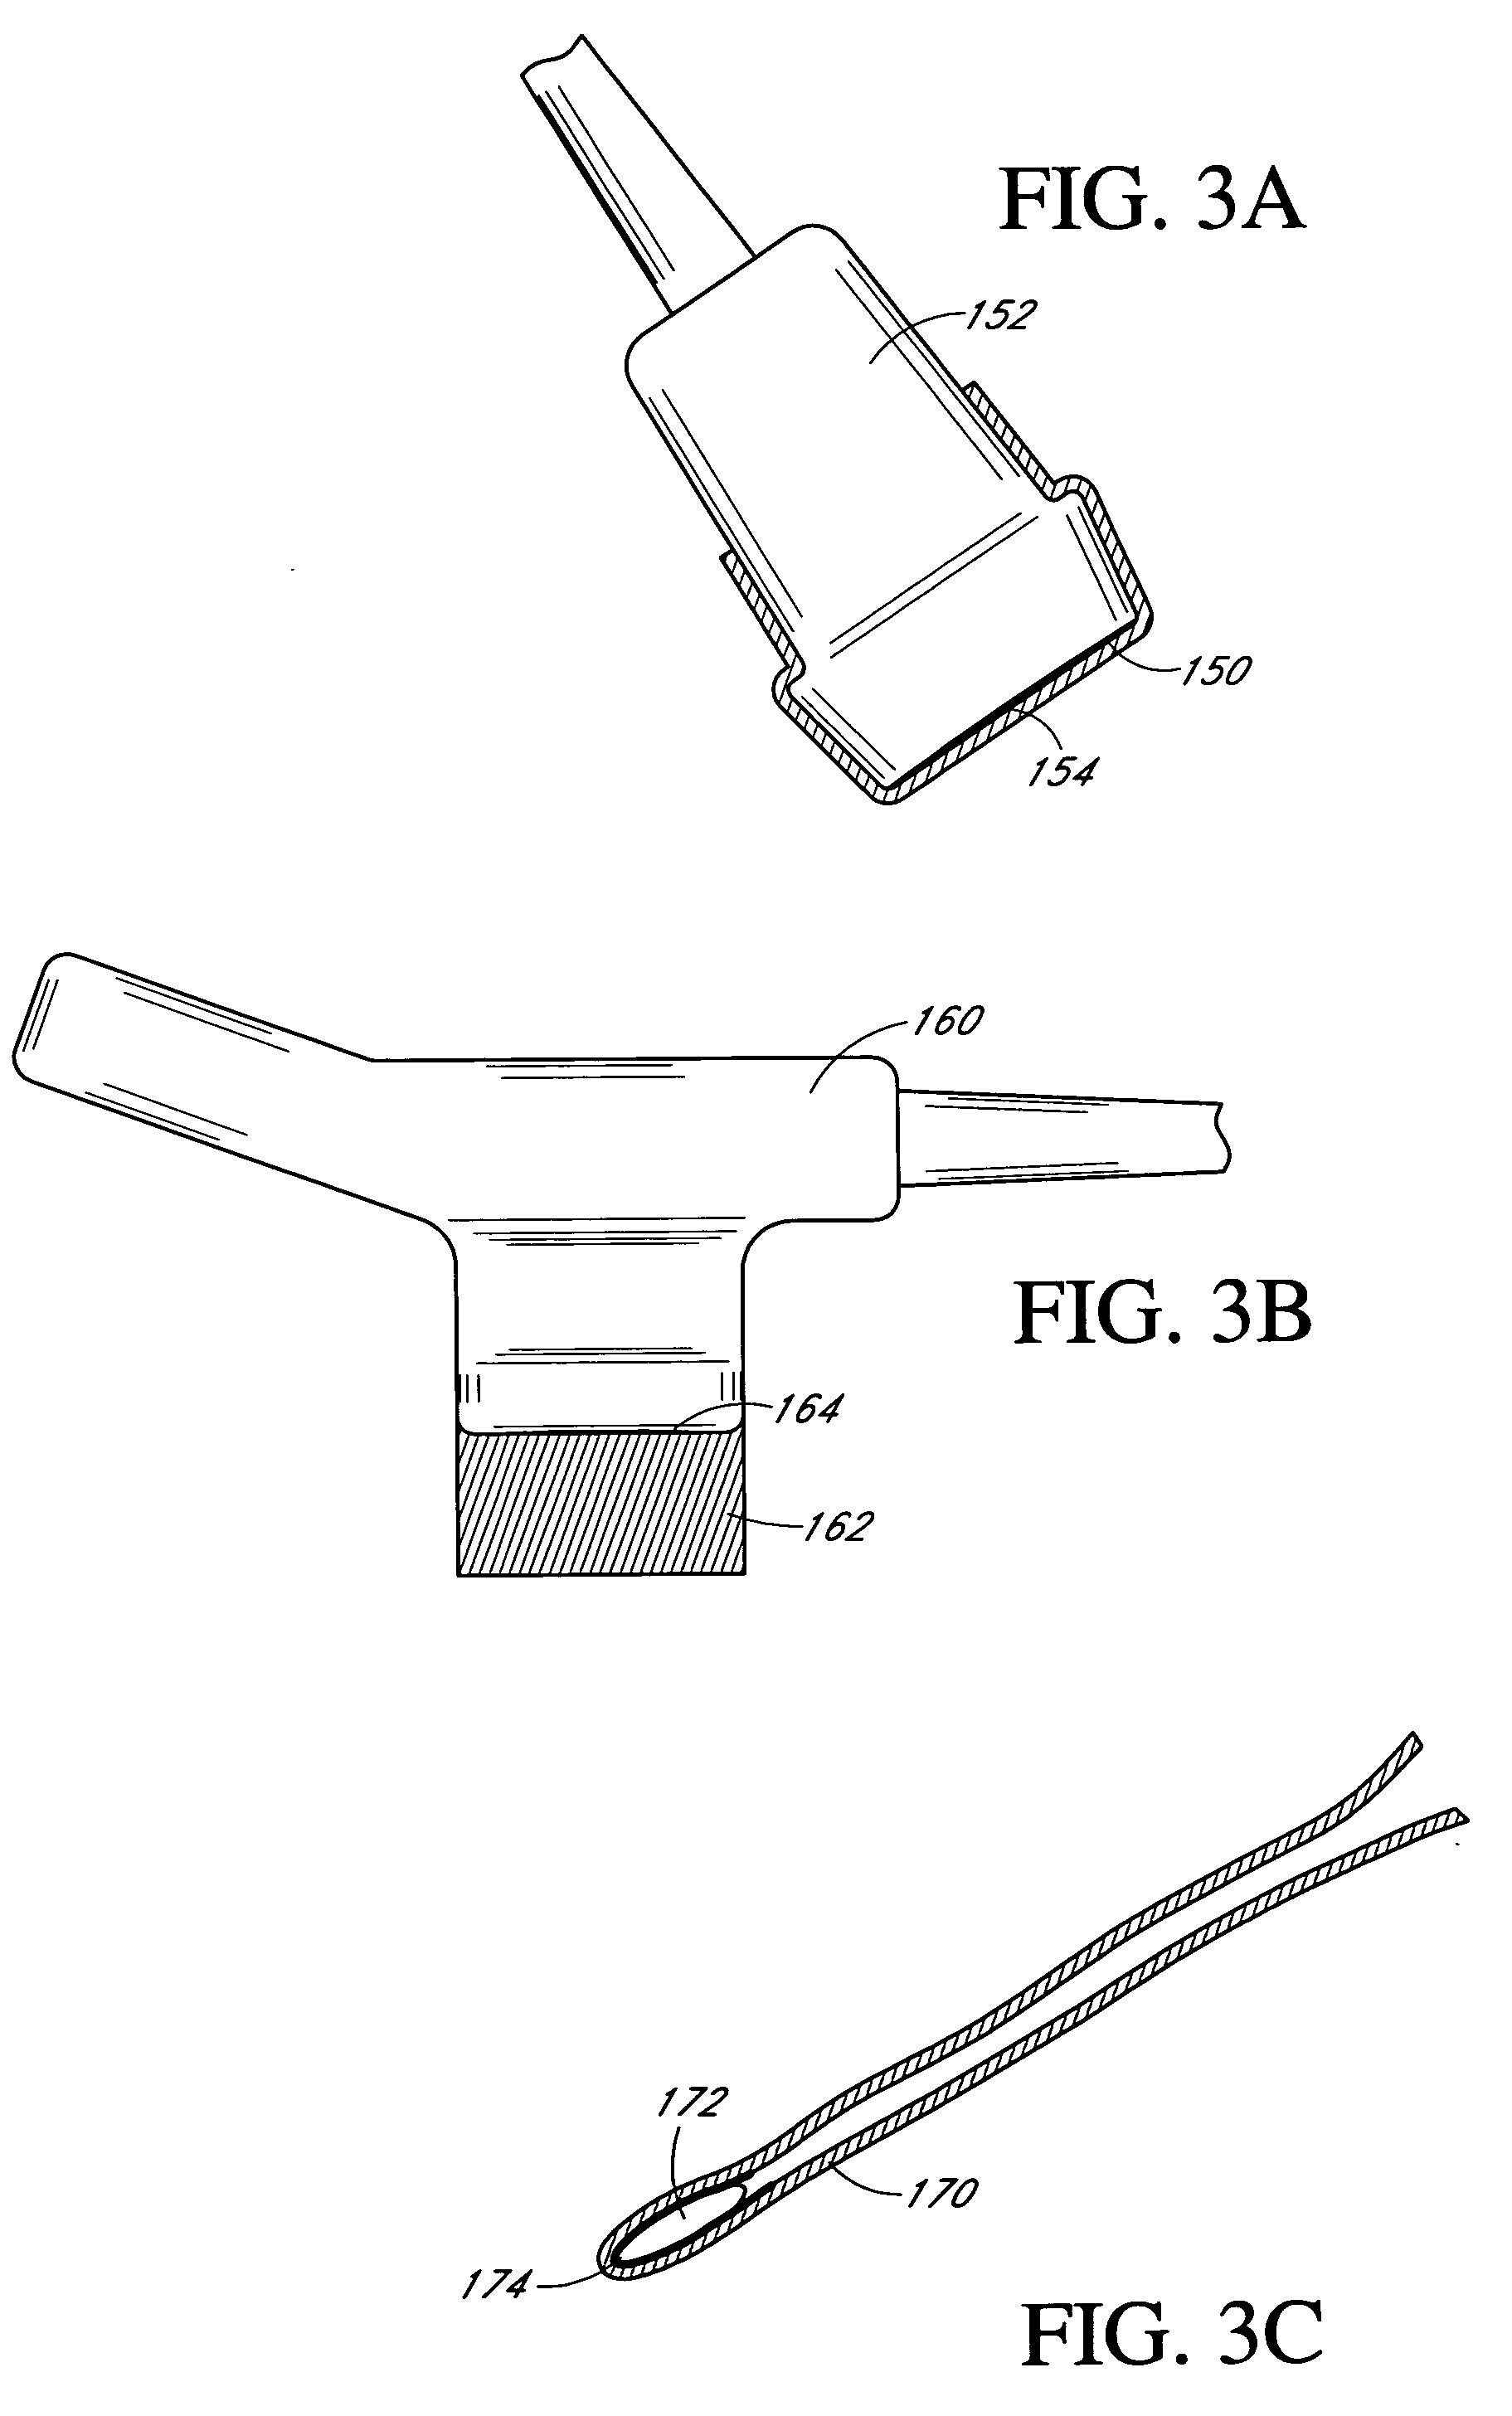 Interface for use between medical instrumentation and a patient